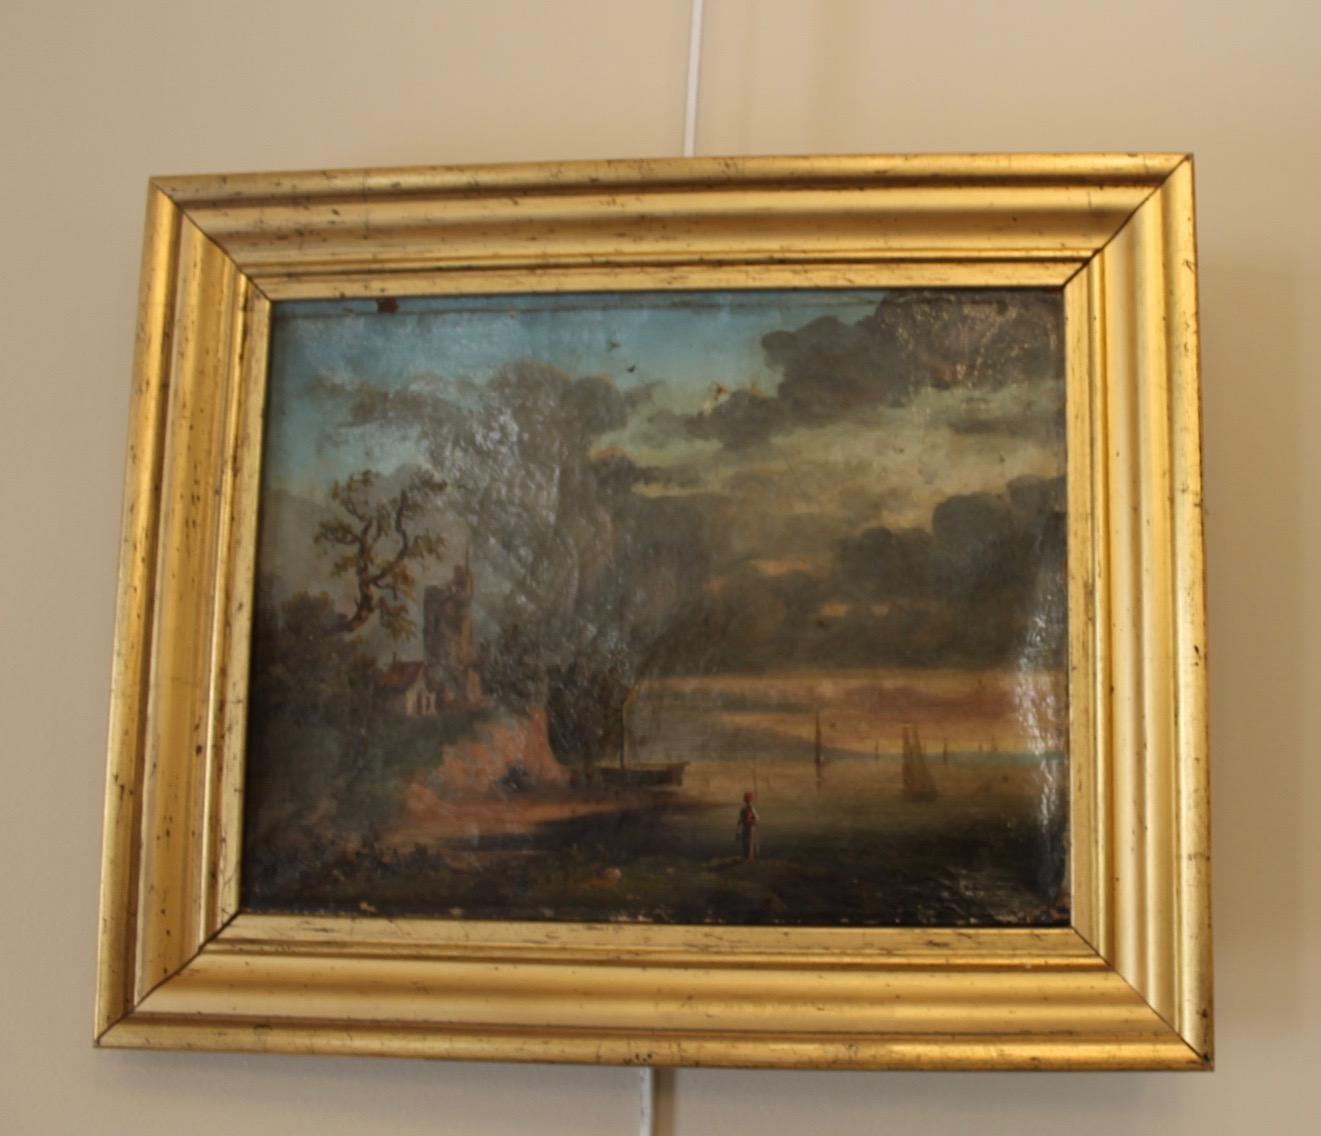 Small oil painting, representing a port from the 19th century, France.
Gilt wood frame.
Vintage canvas.